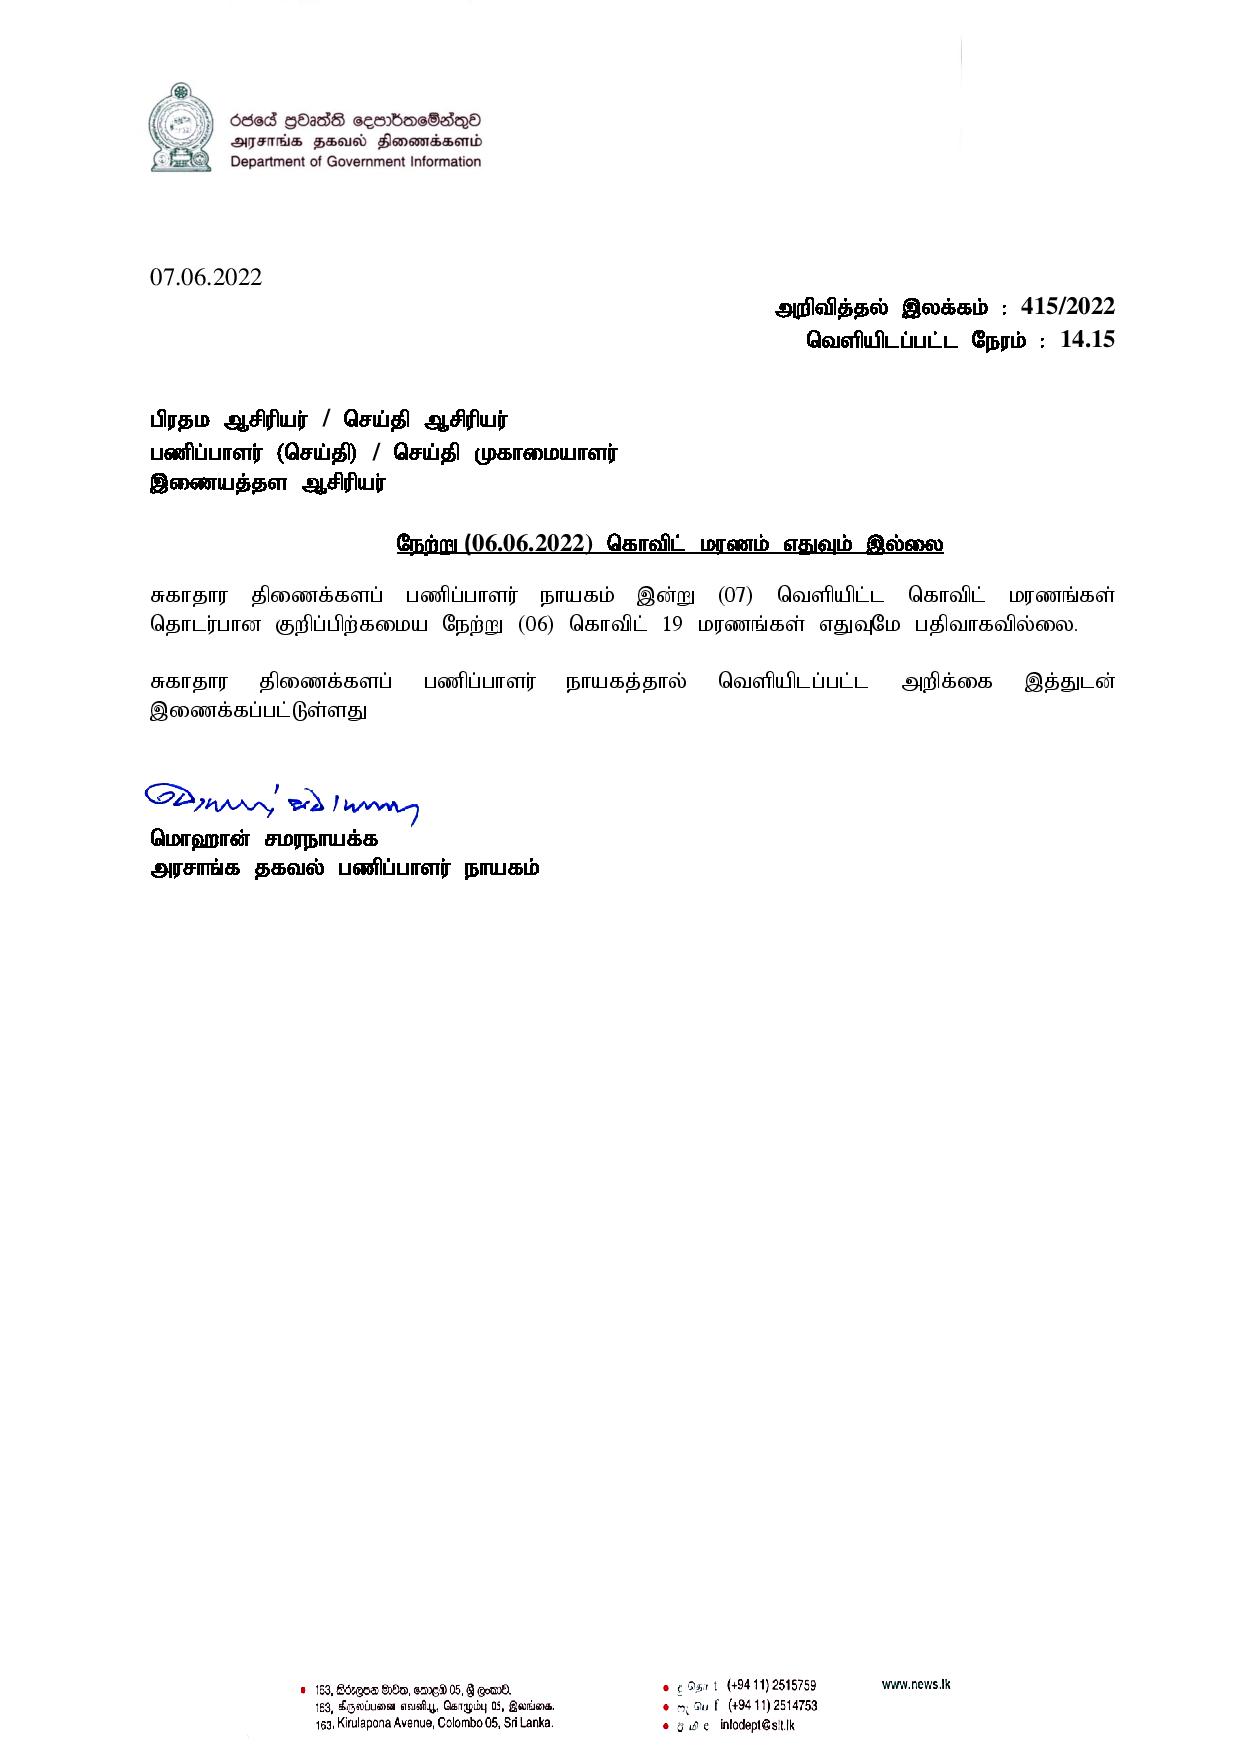 Press Release 415 Tamil page 001